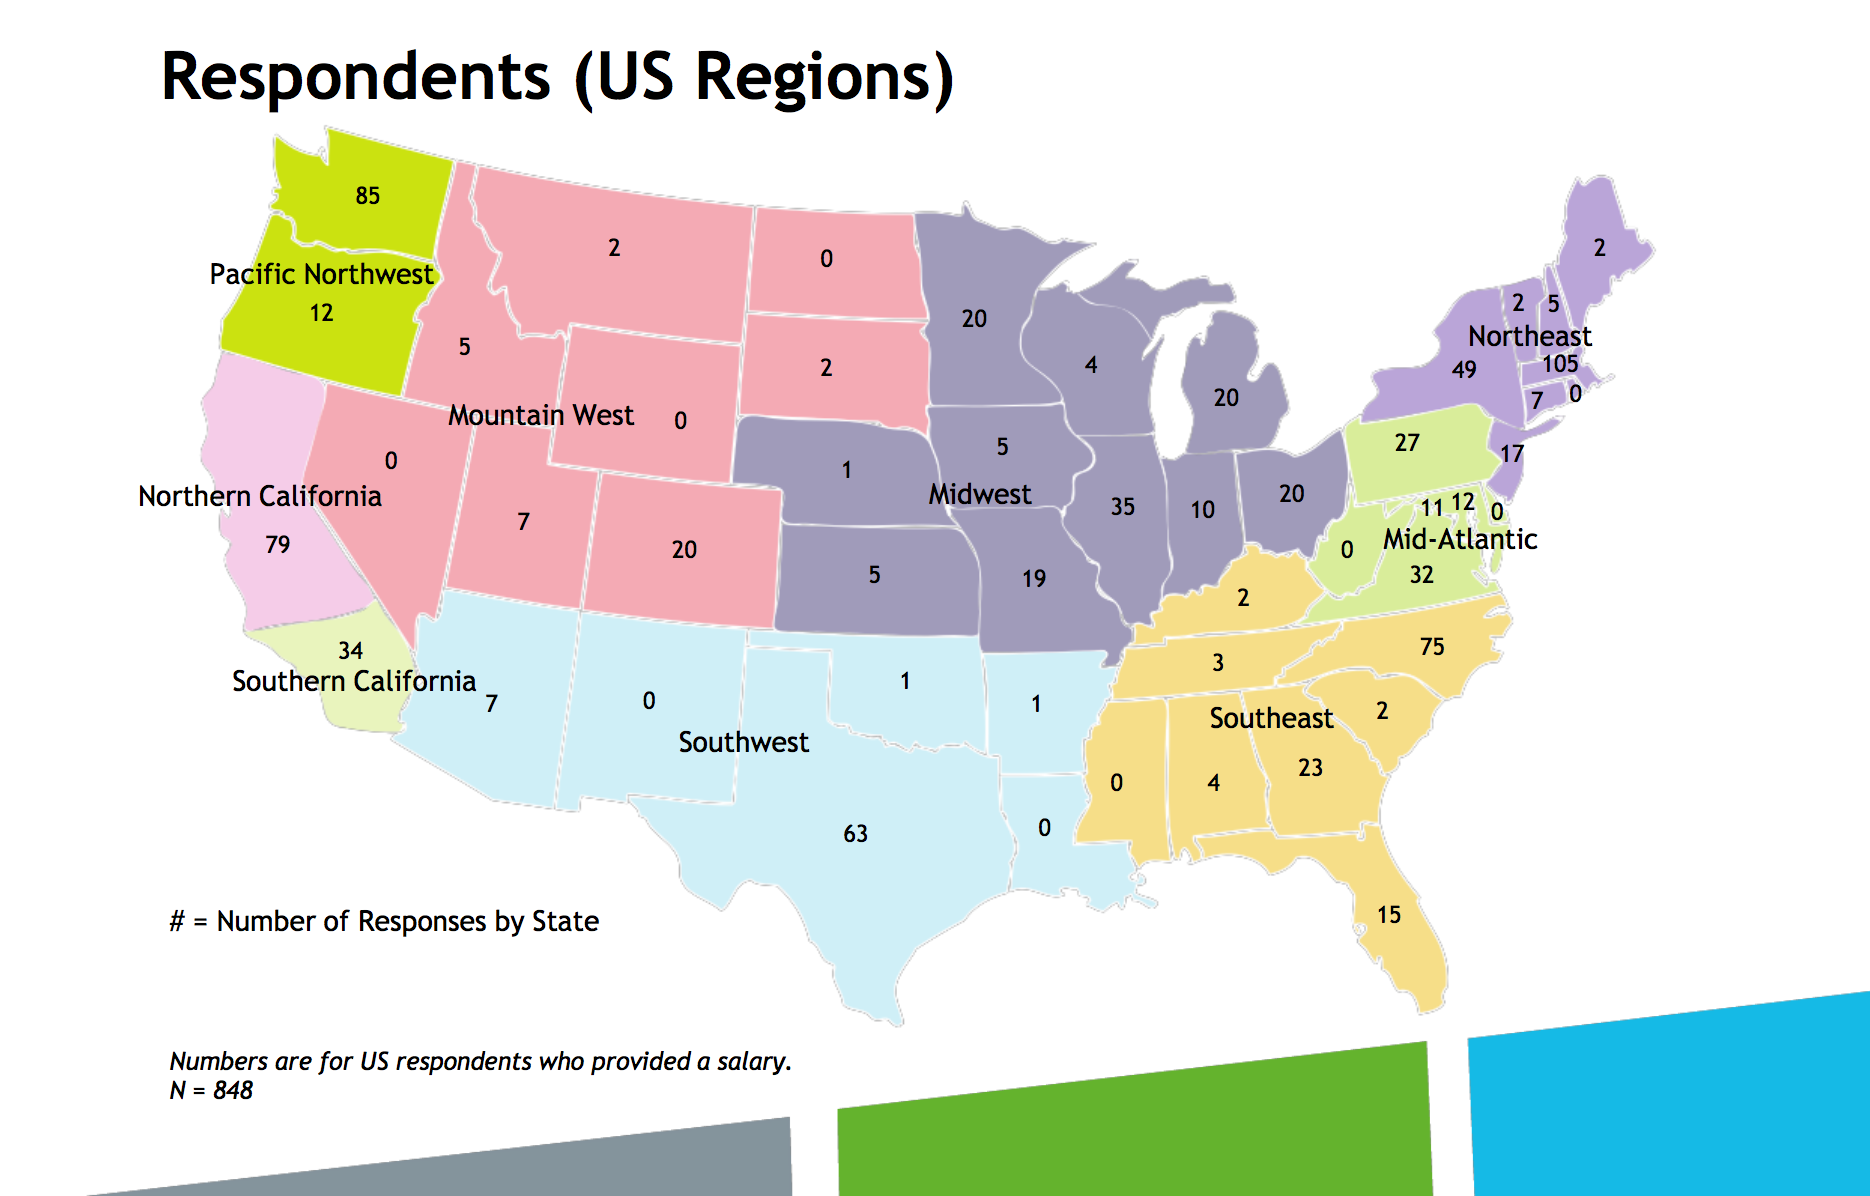 map of the US showing regions and number of respondents from each state